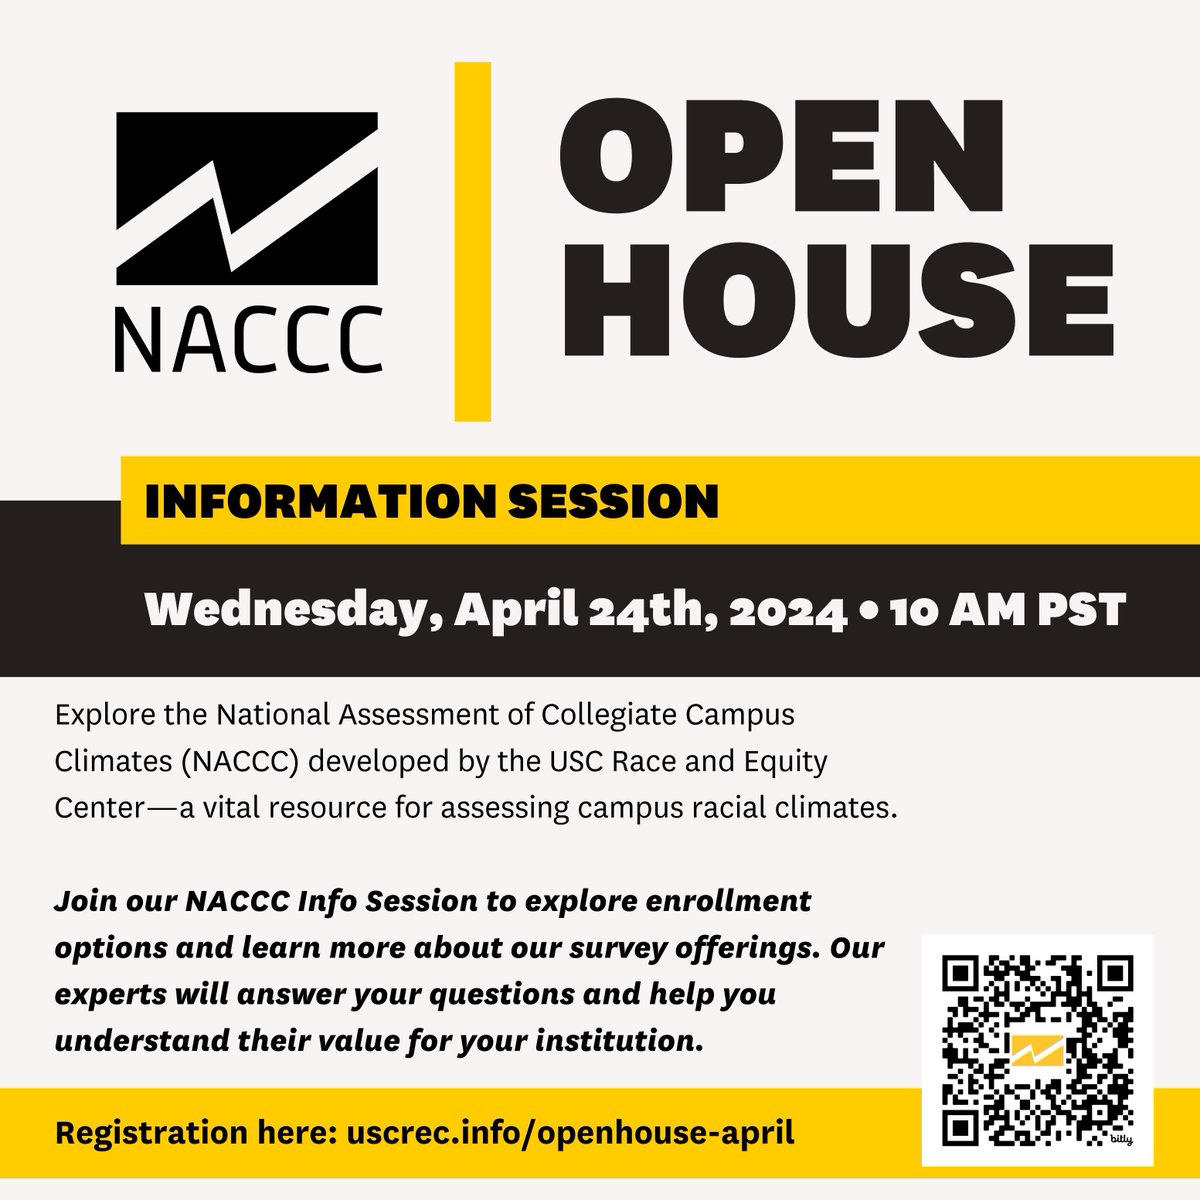 Interested in taking part of an #assessment for #campus climate? Join an info session on Wednesday, April 24 at 10 am PST. Our NACCC team will guide you and answer all your questions while you explore your enrollment options. Register at: uscrec.info/openhouse-april